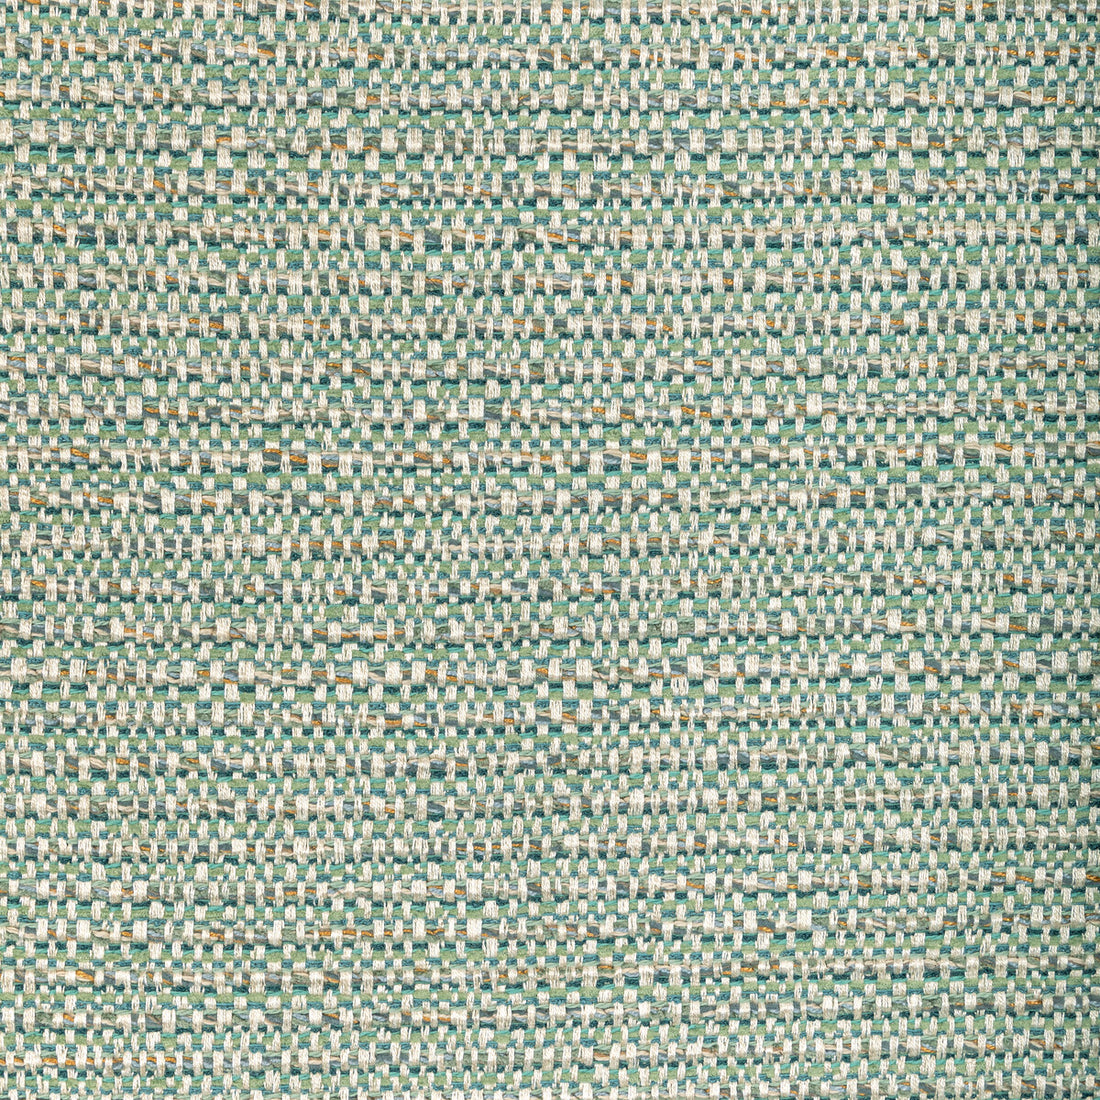 Kravet Design fabric in 36417-1311 color - pattern 36417.1311.0 - by Kravet Design in the Performance Crypton Home collection